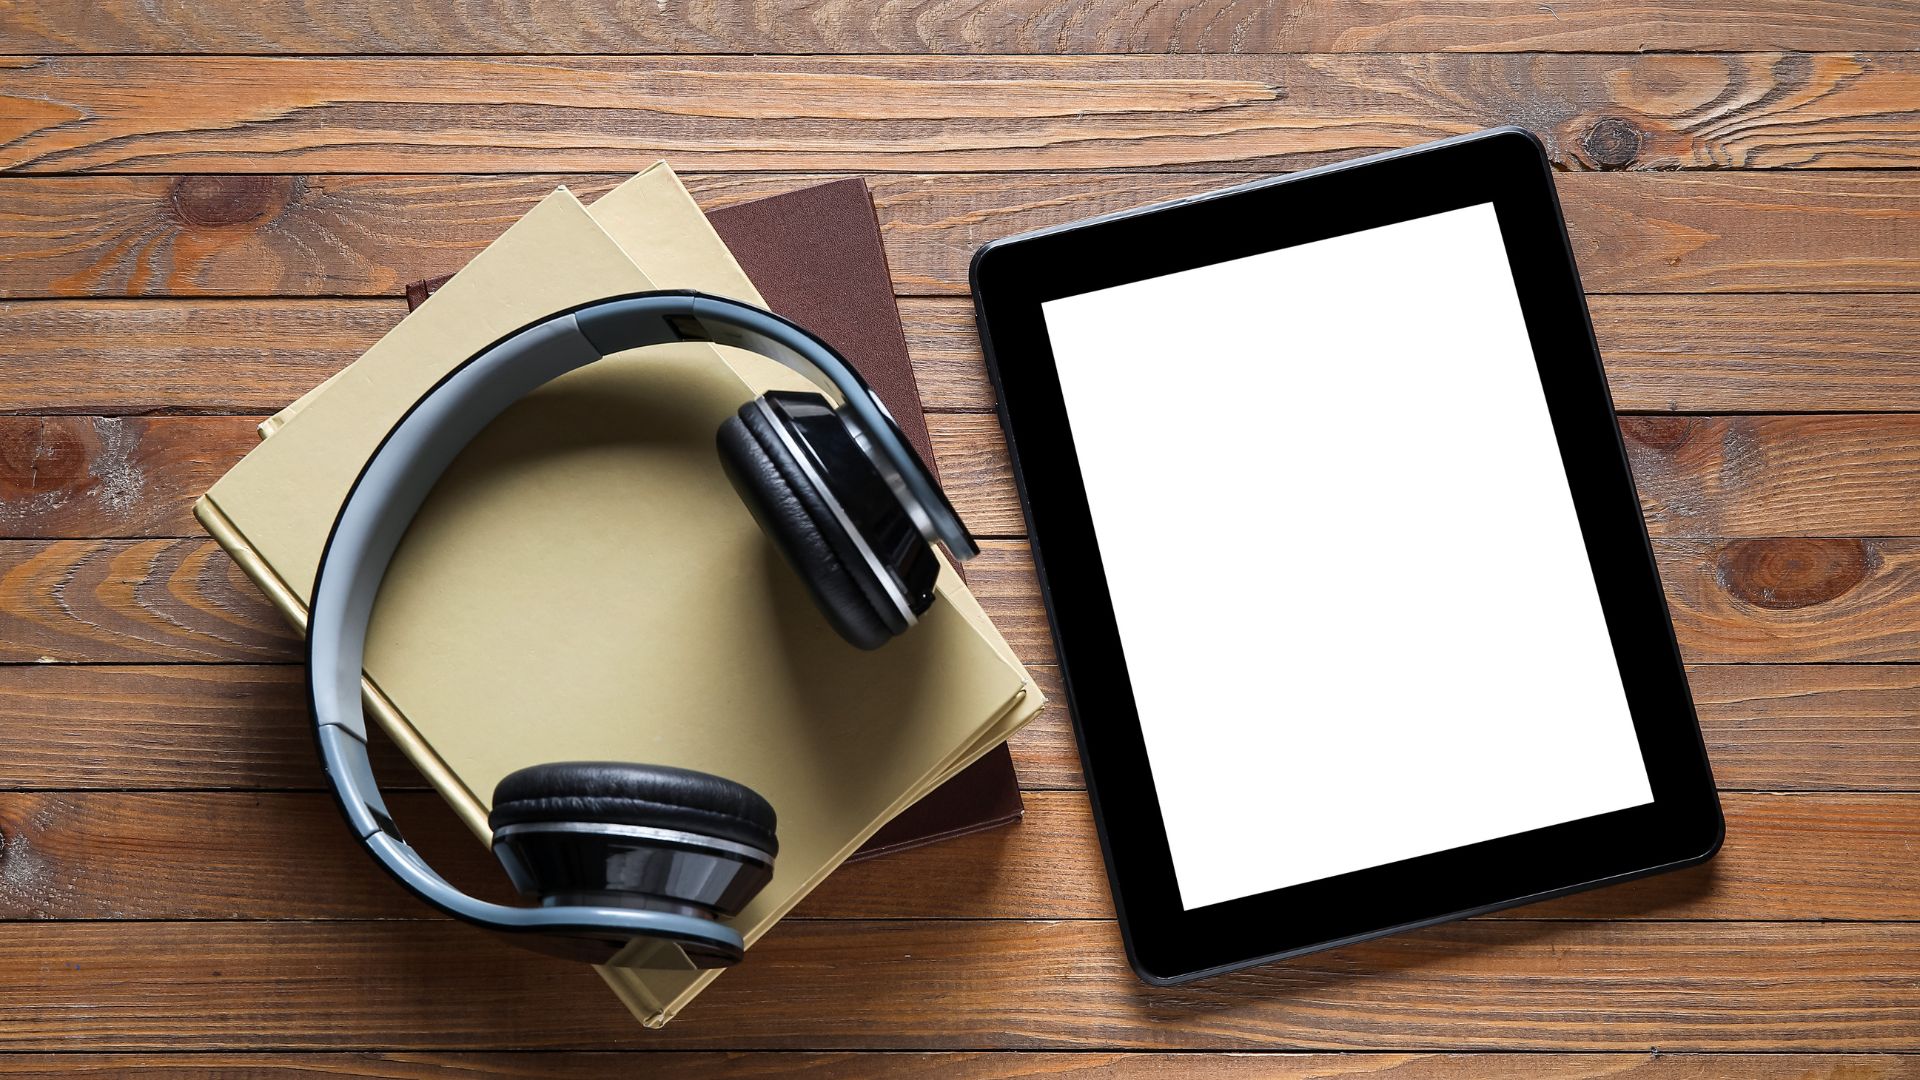 A pair of headphones, books and a tablet.